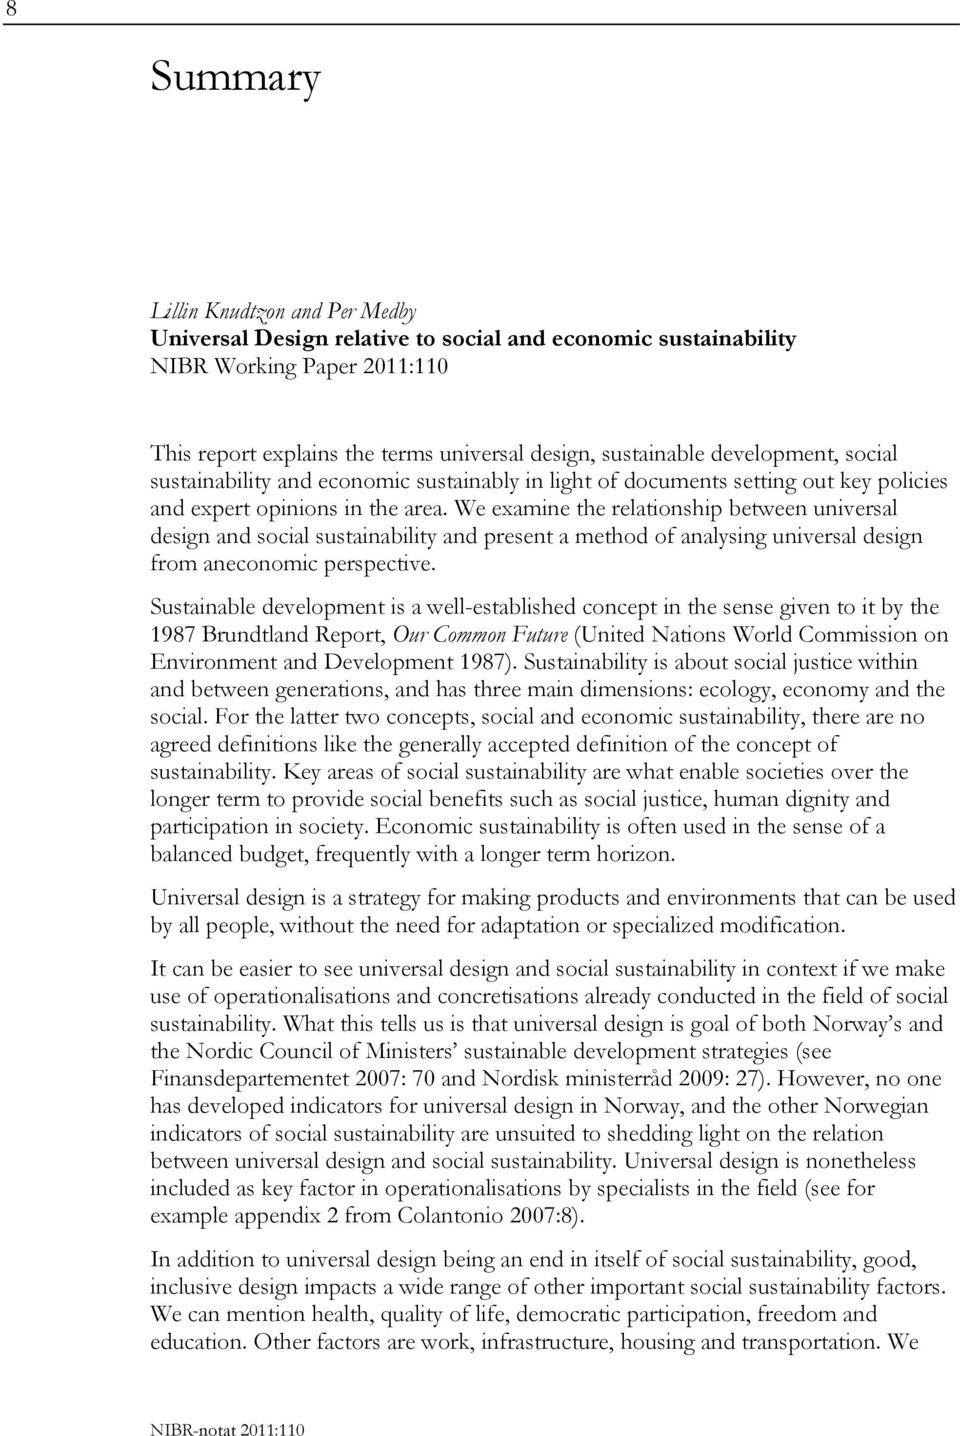 We examine the relationship between universal design and social sustainability and present a method of analysing universal design from aneconomic perspective.